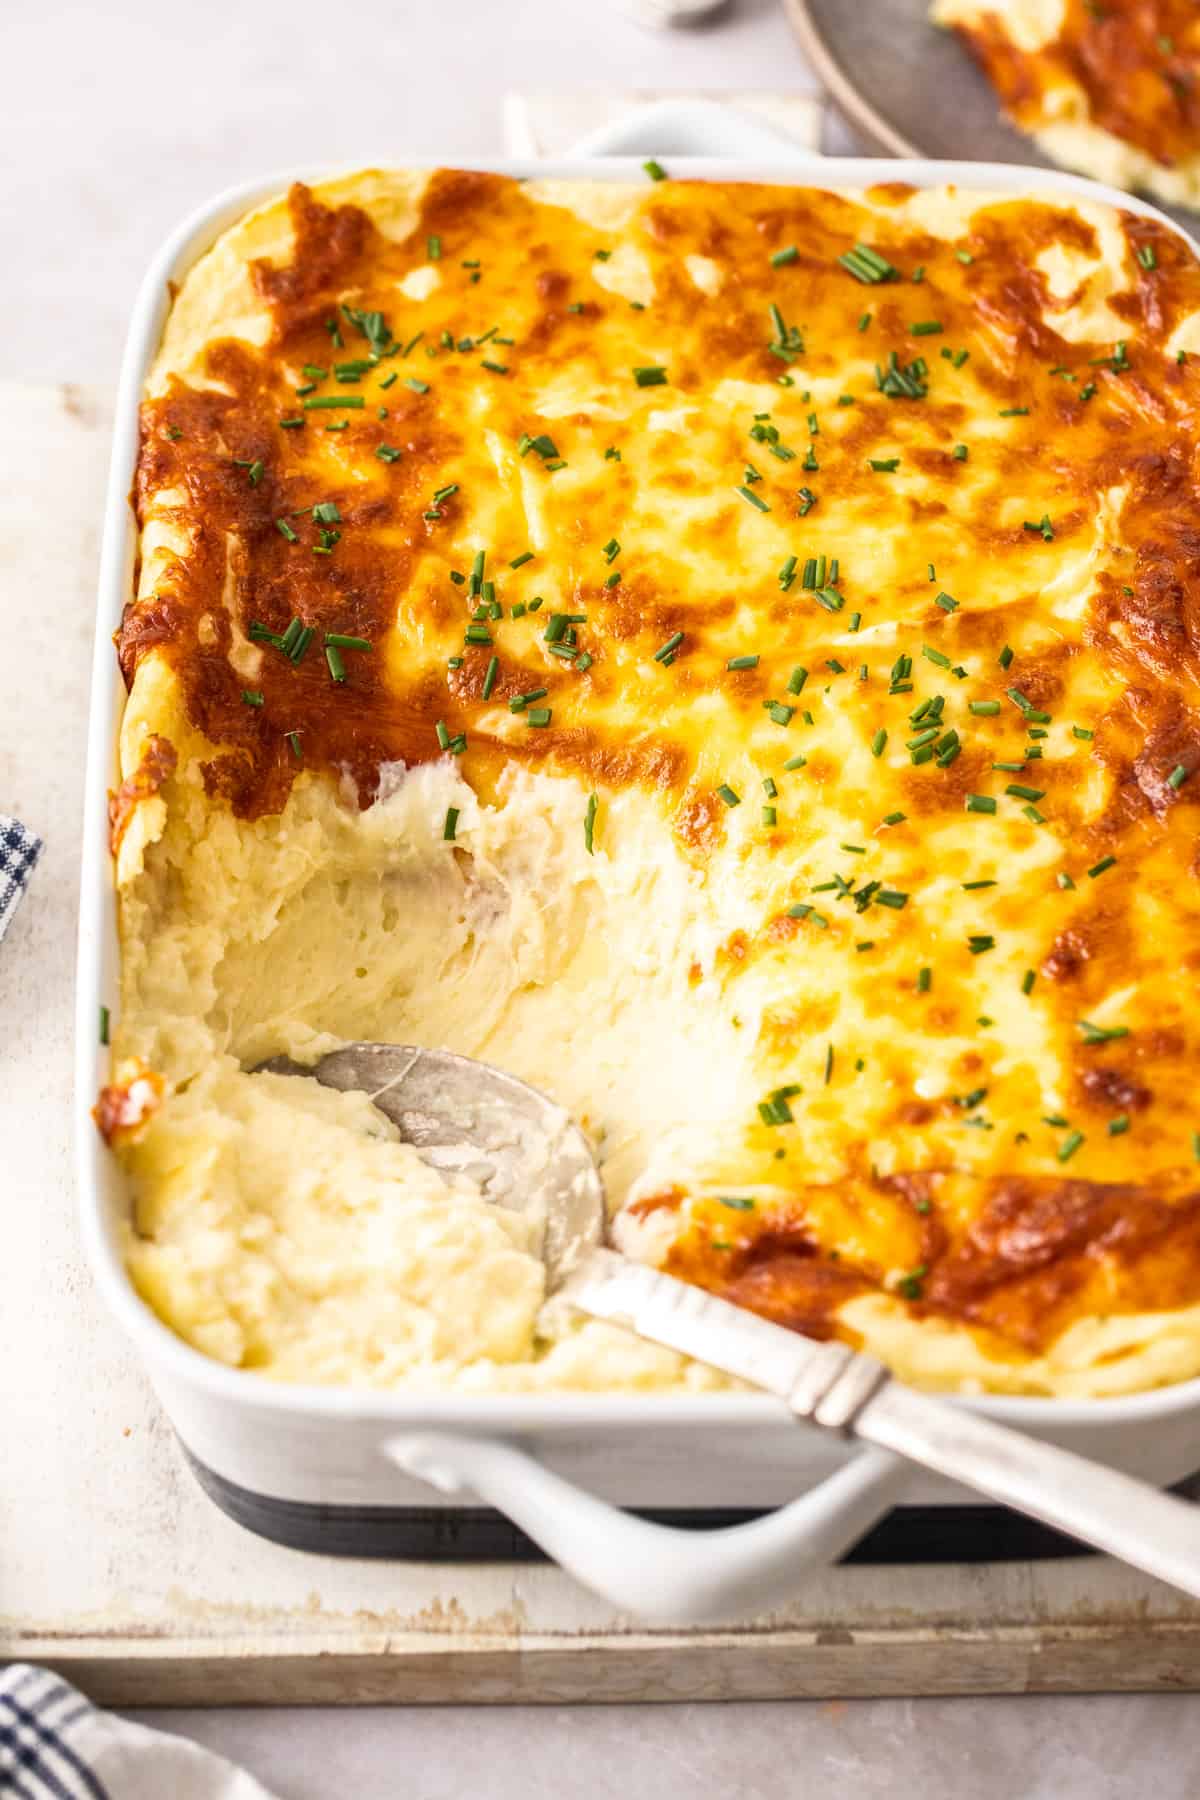 casserole dish of mashed potatoes with cheesy golden topping